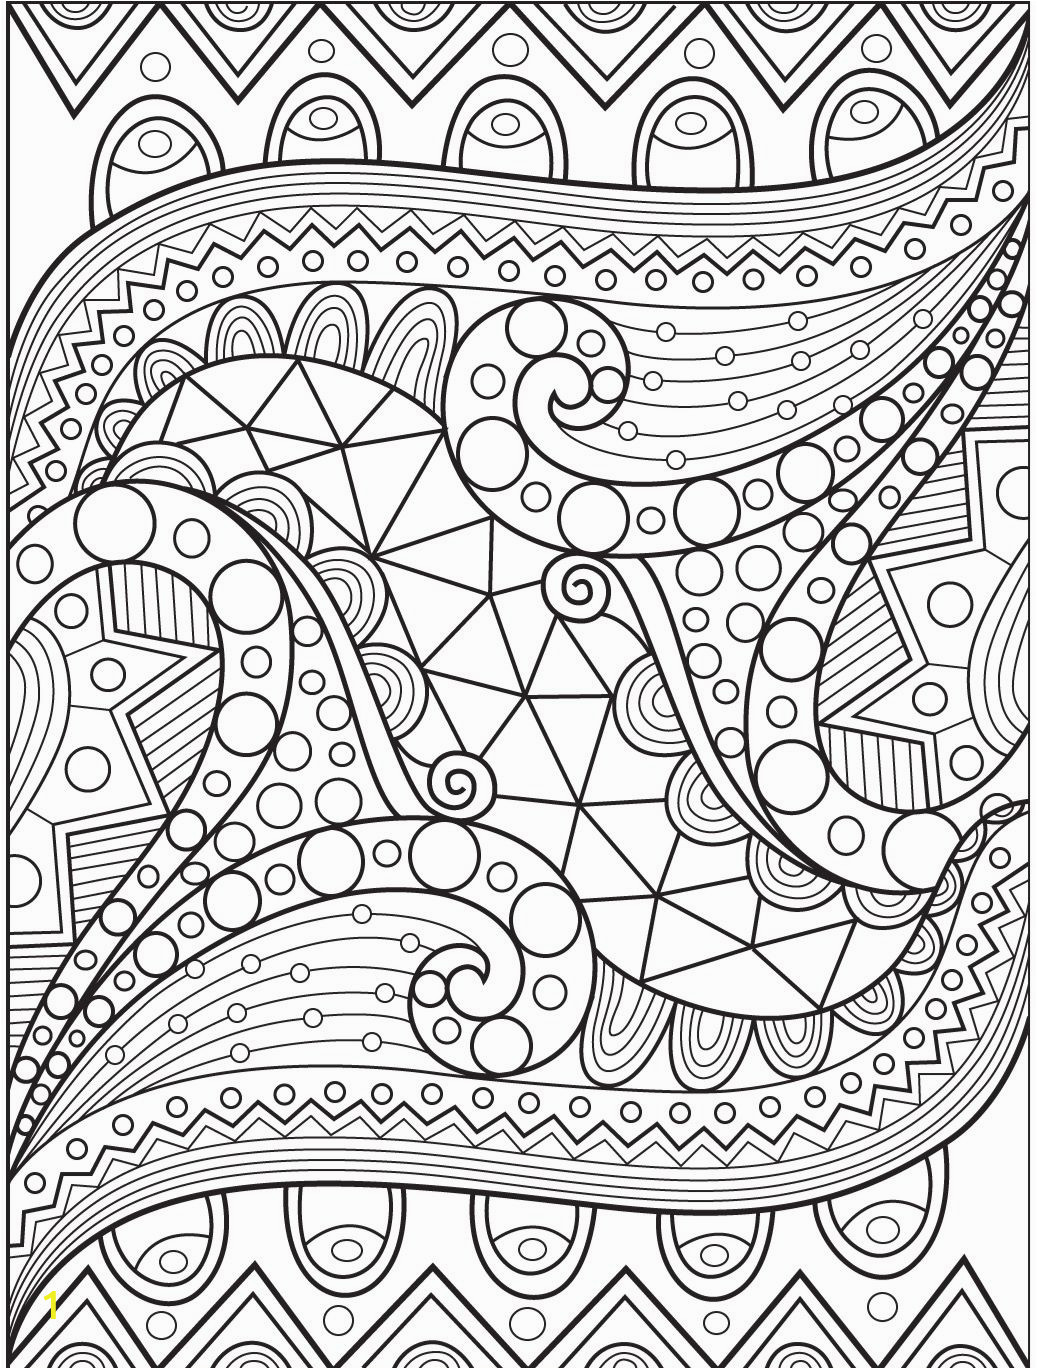 Printable Quilt Patterns Coloring Pages Abstract Coloring Page On Colorish Coloring Book App for